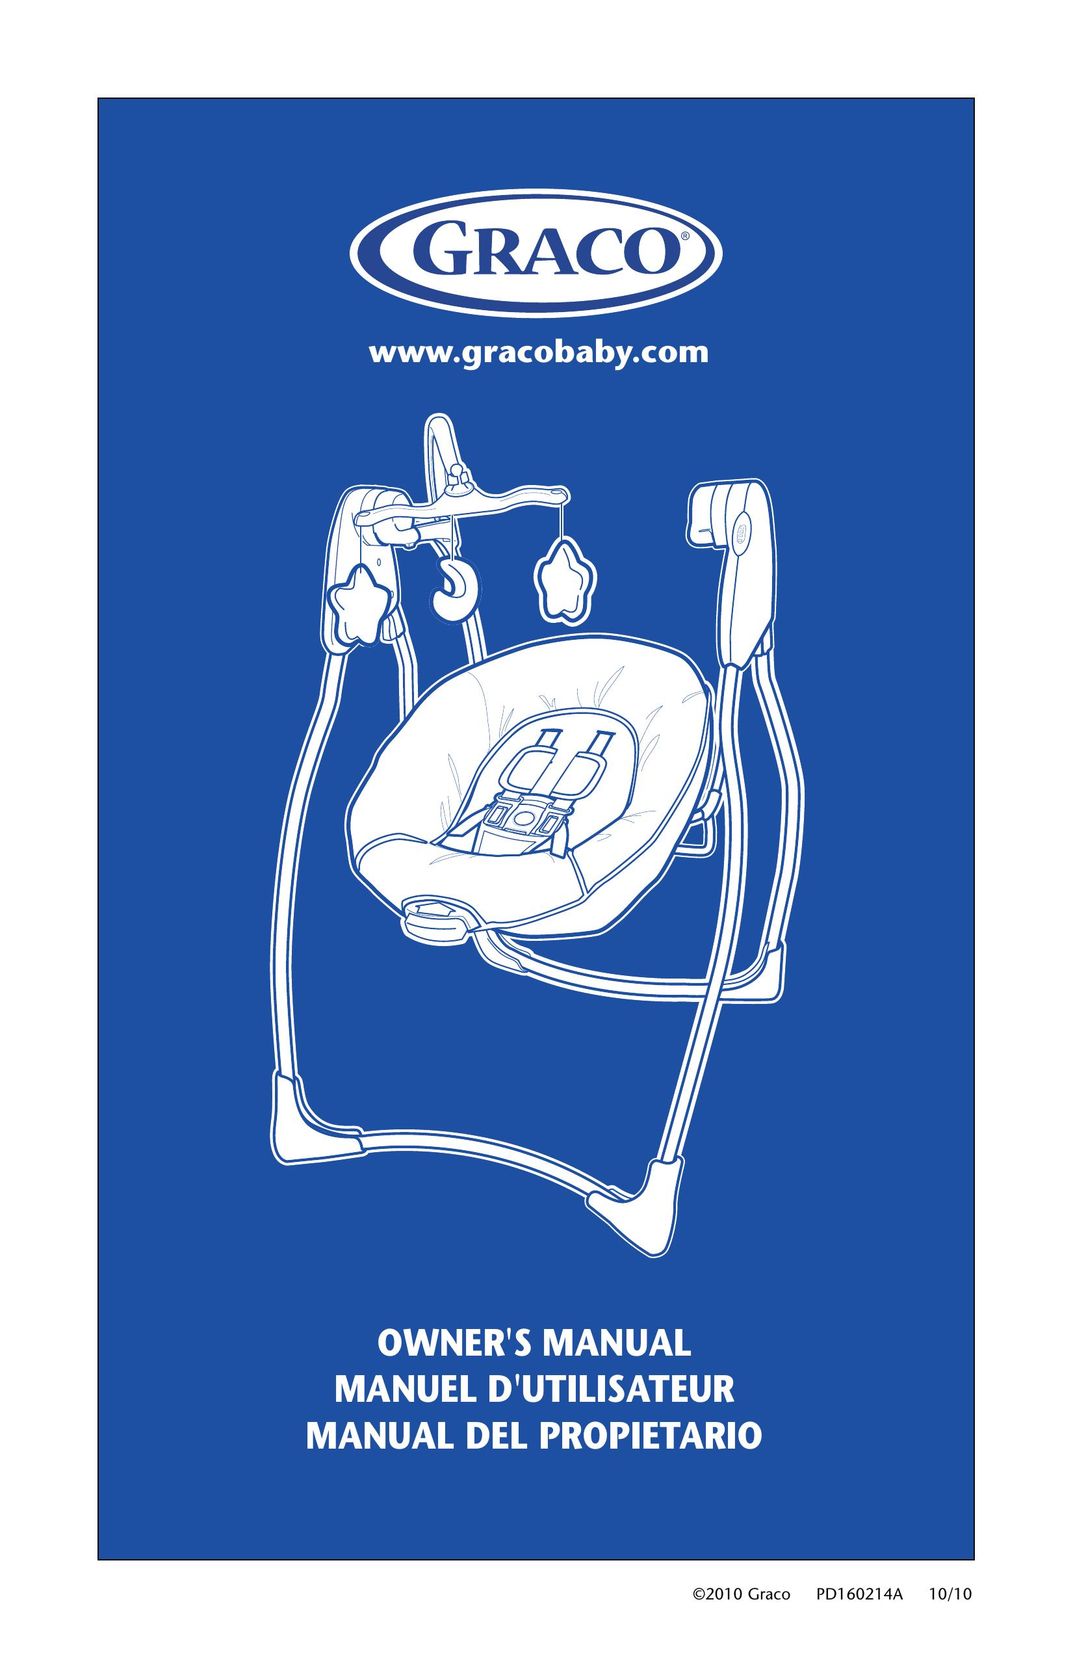 Graco PD160214A Bouncy Seat User Manual